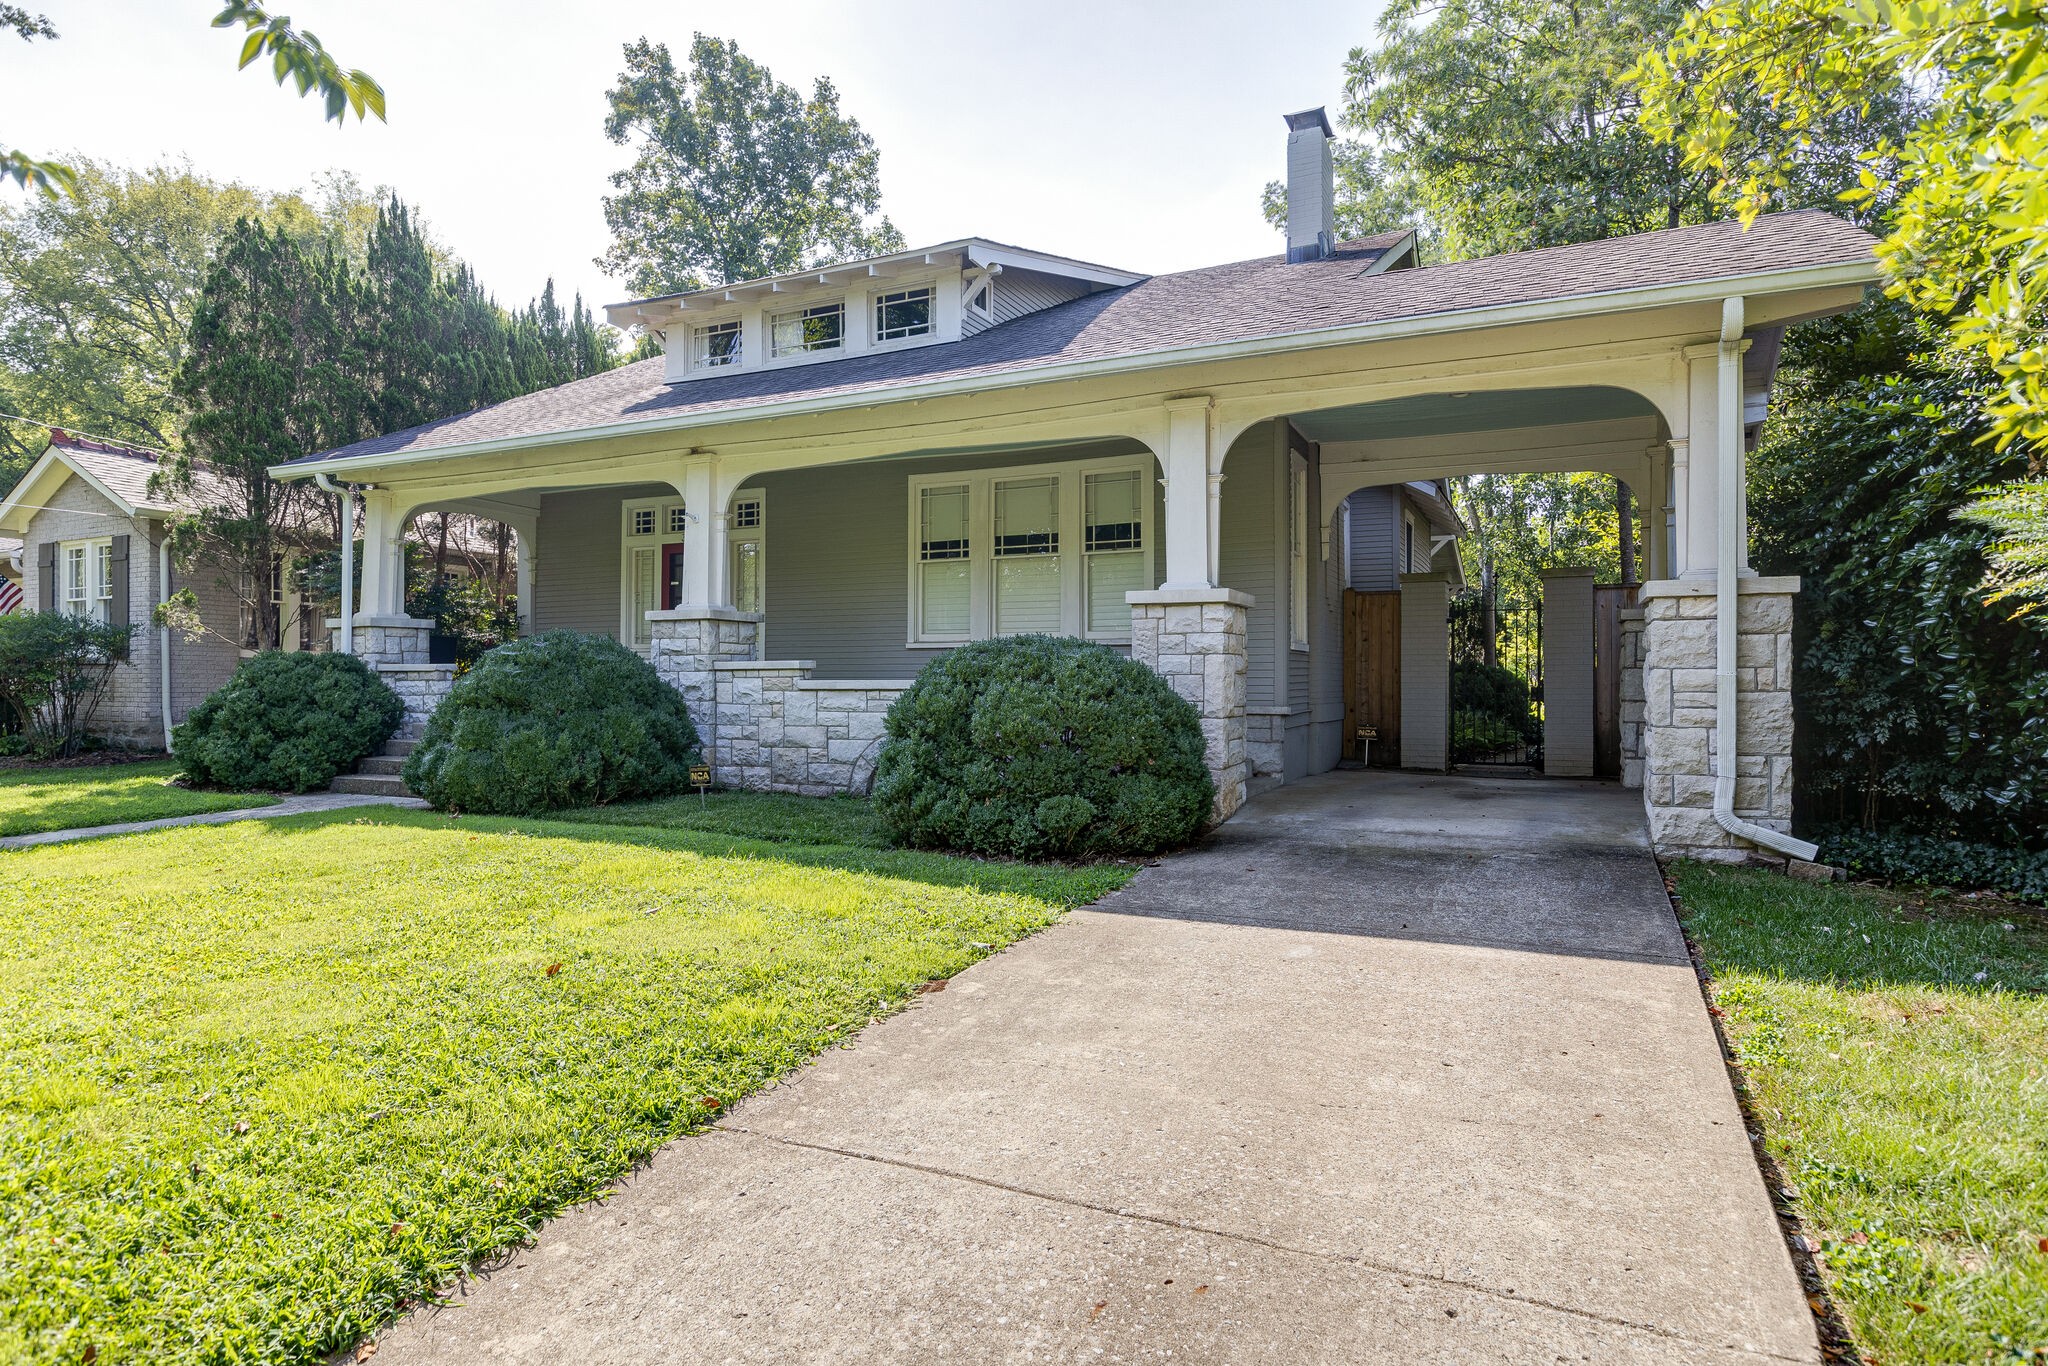 Ridley Wills designed Renovation of this FAB Bungalow in Historic Richland Neighborhood, Stylish yet